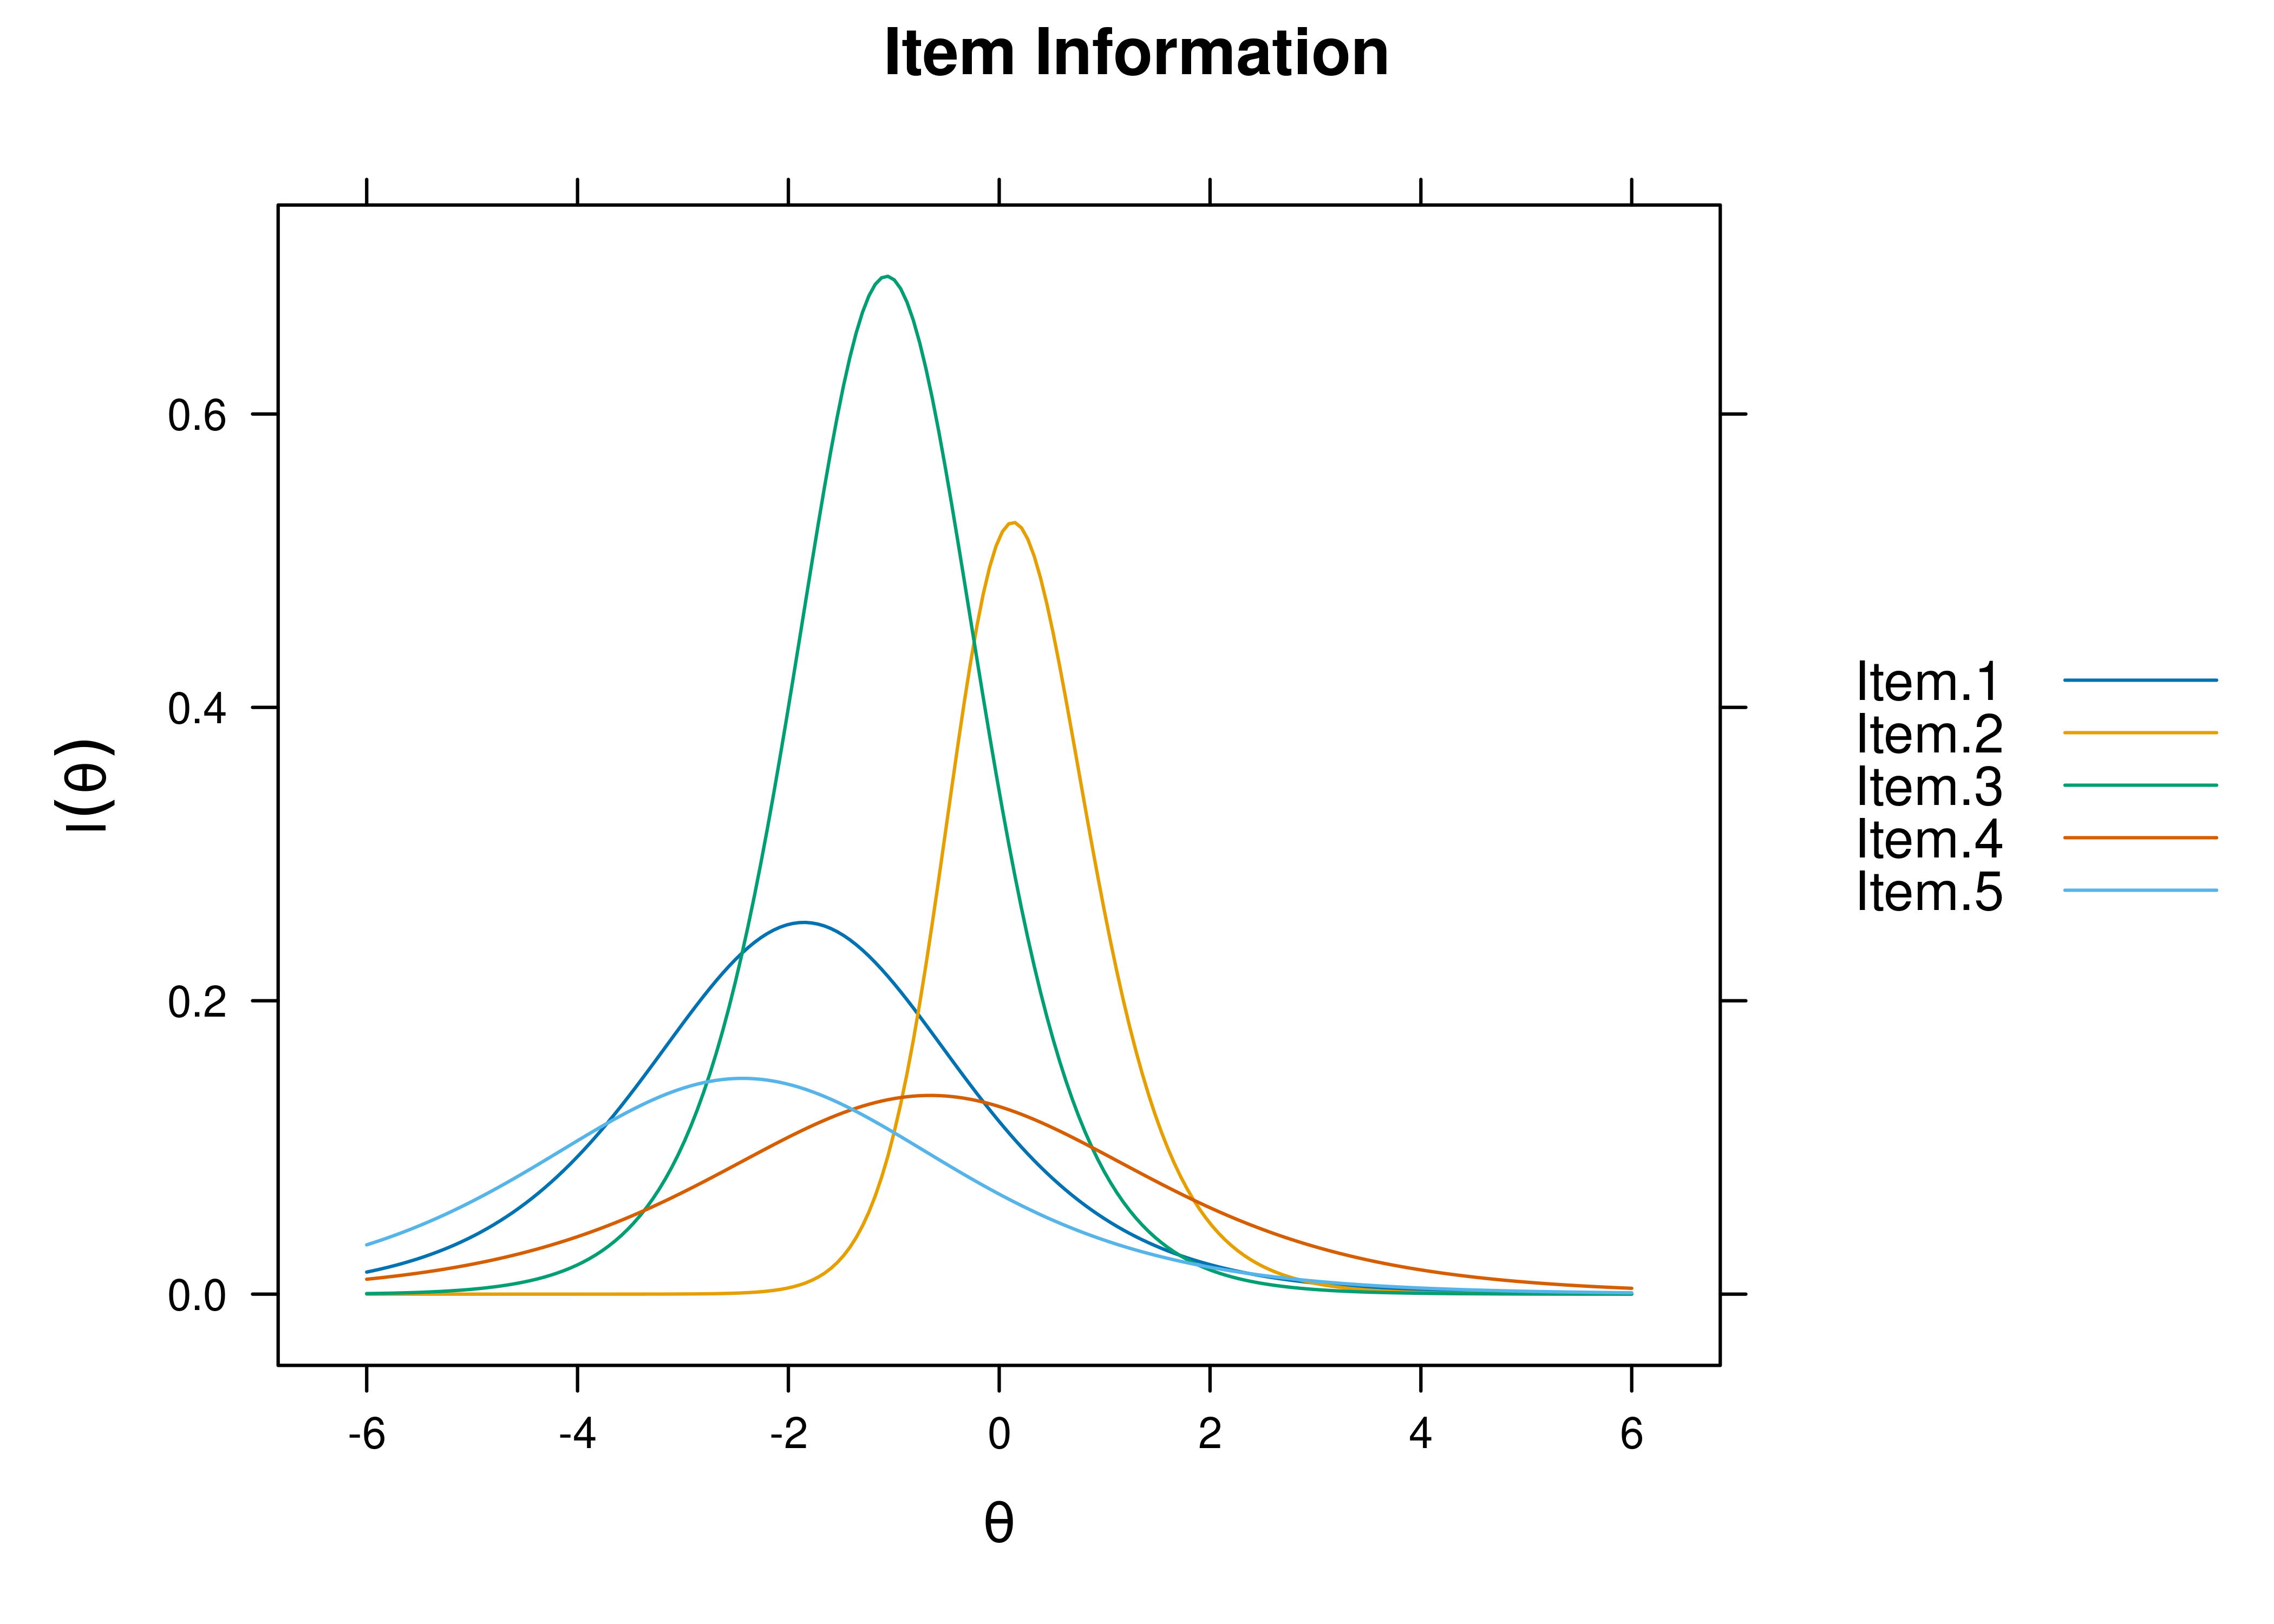 Item Information Curves From Three-Parameter Logistic Item Response Theory Model.